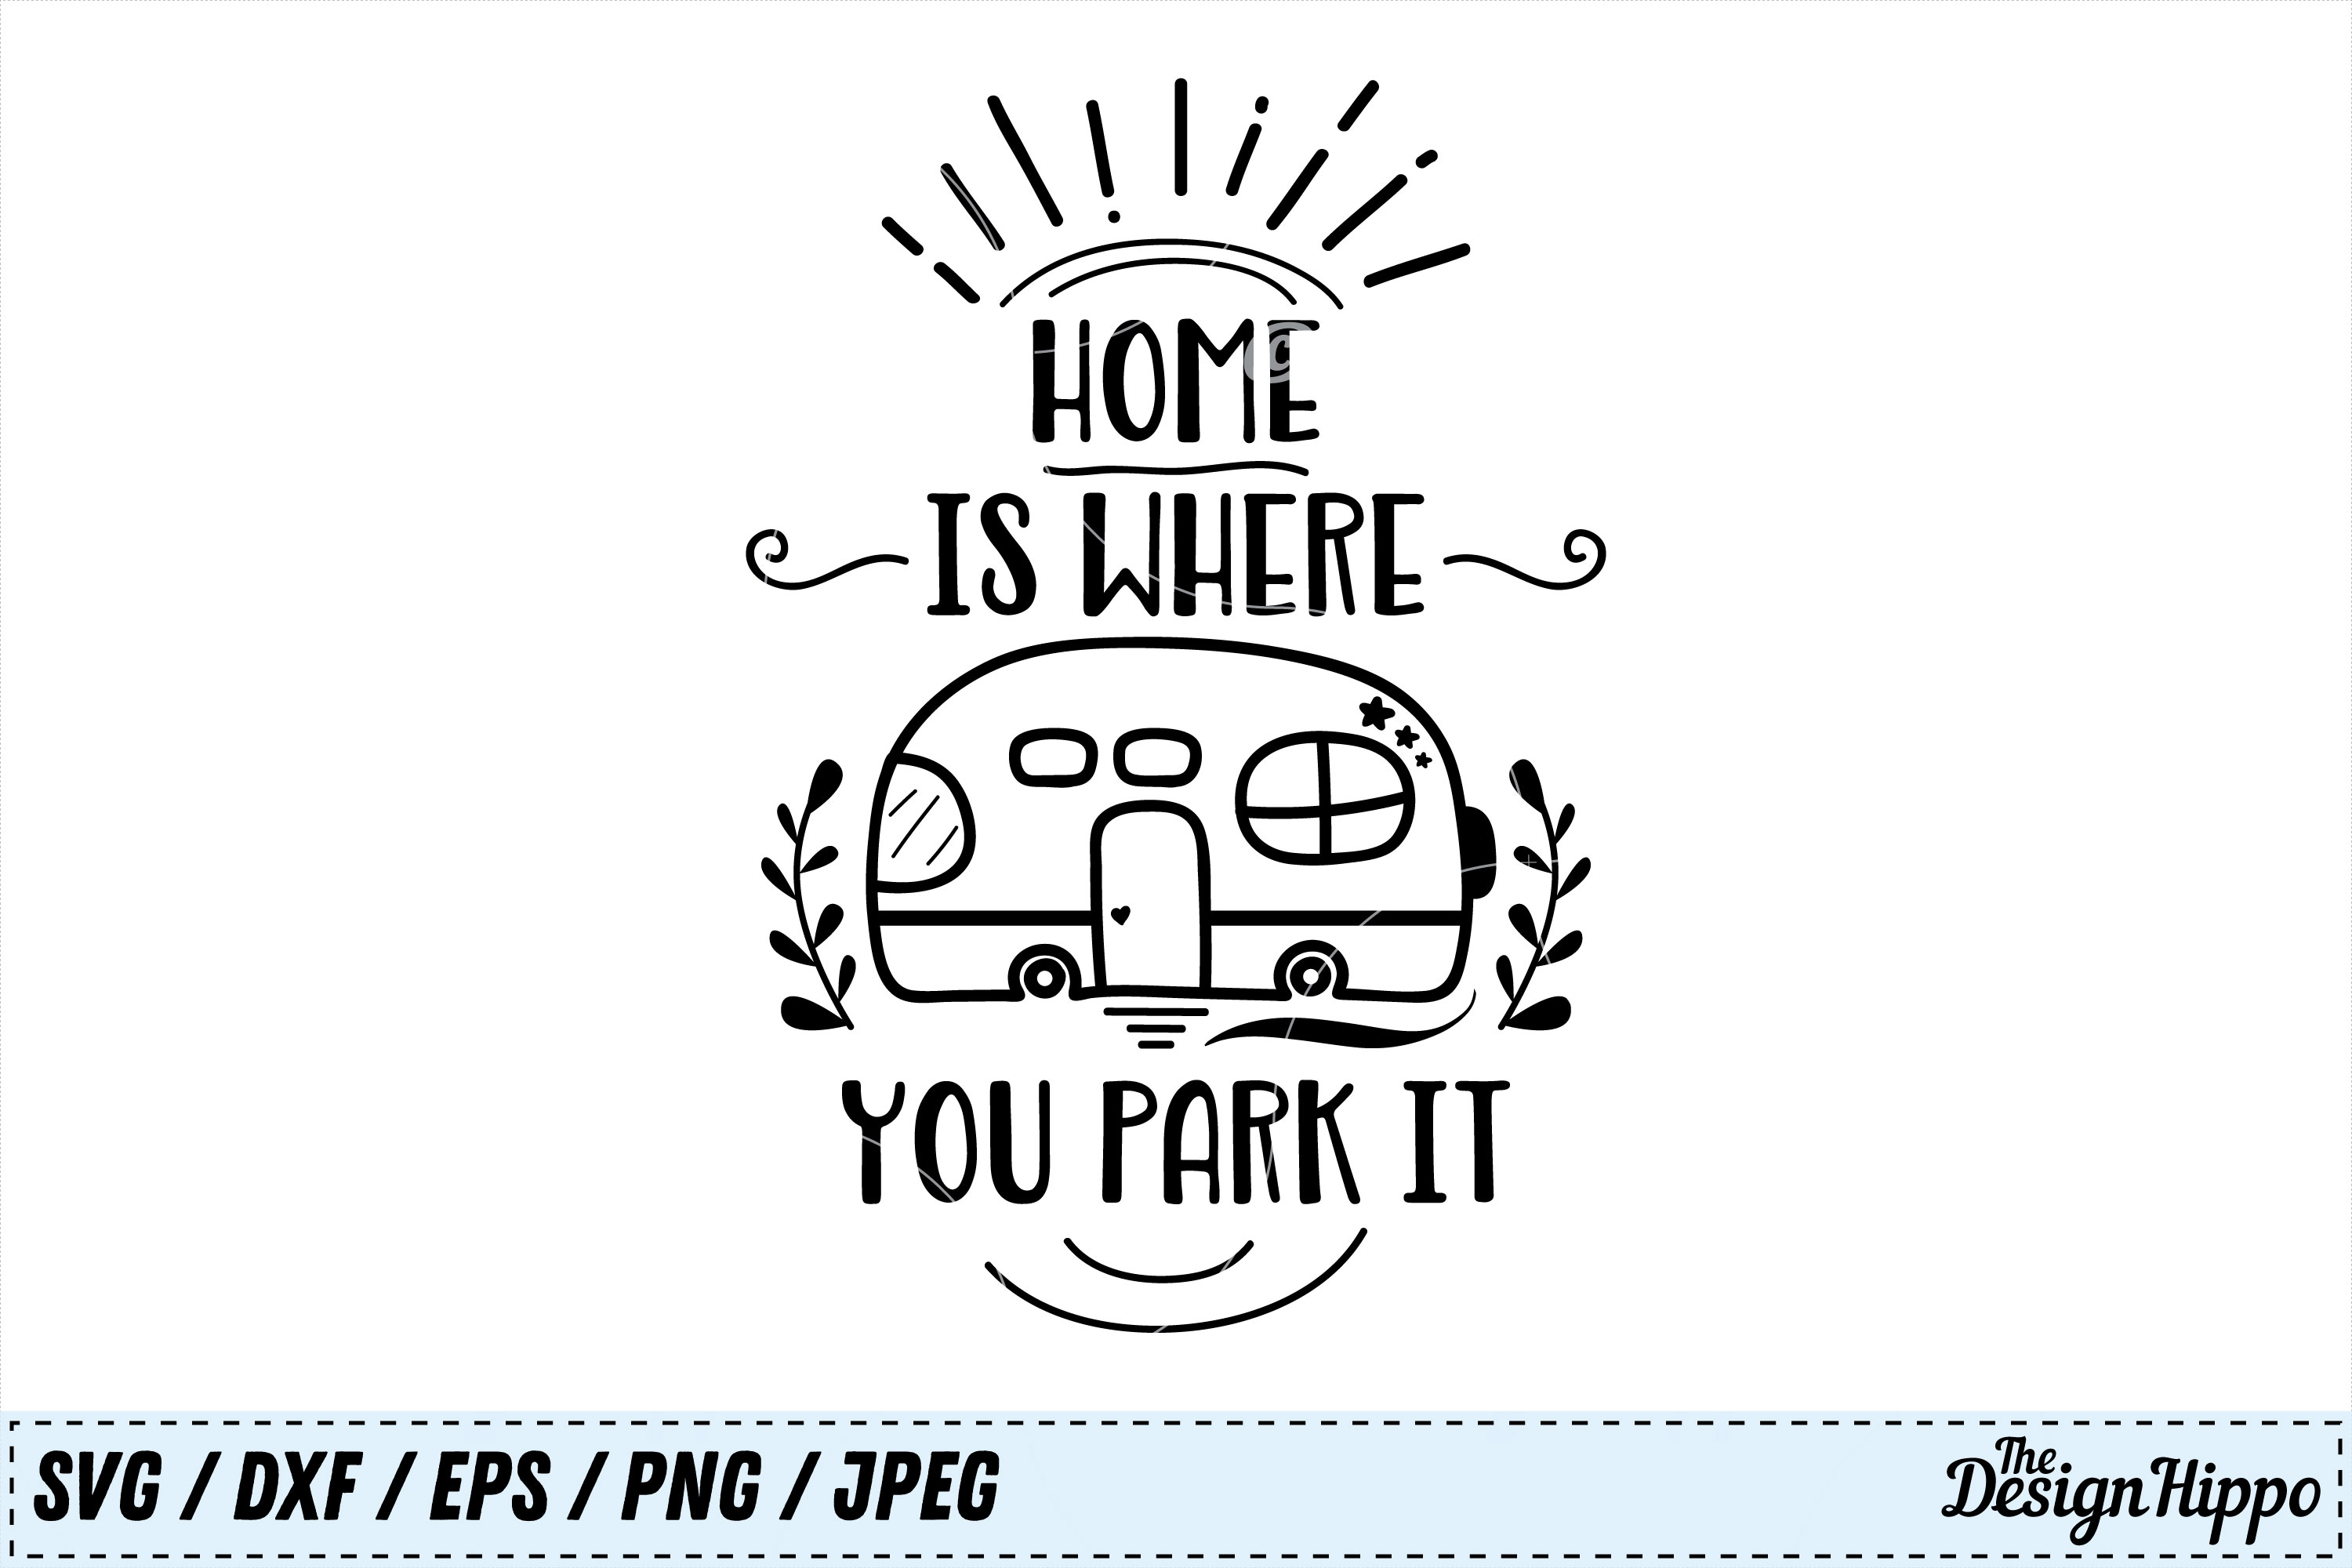 Download Home is where you park it, SVG, Camp PNG, Camping DXF, Home